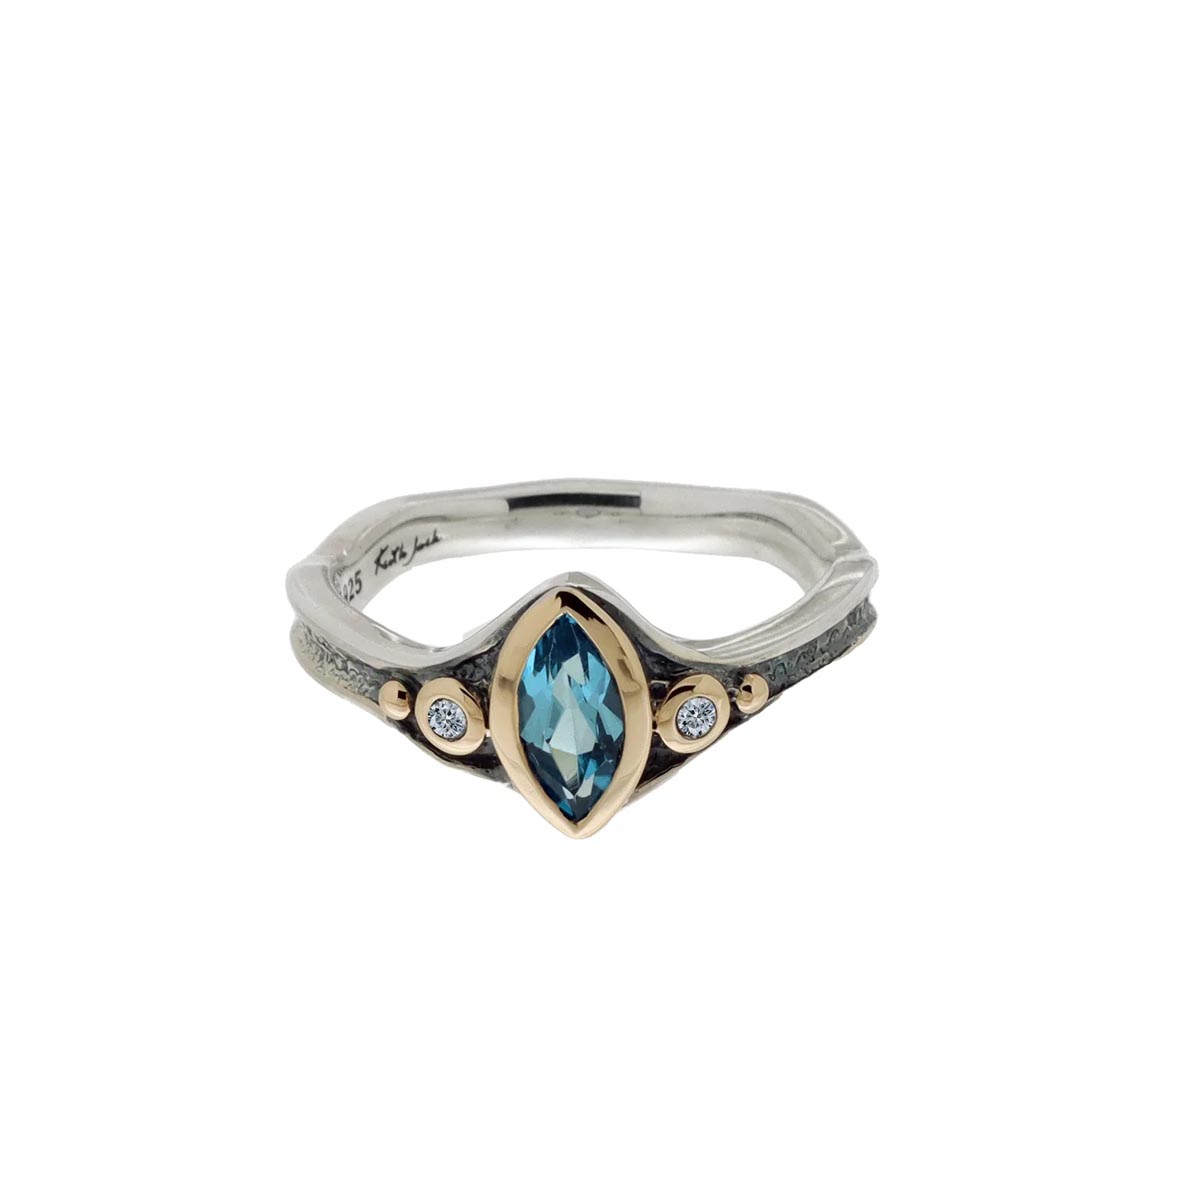 Keith Jack Rocks n Rivers Marquise Swiss Blue Topaz Ring in Sterling Silver and 10kt Yellow Gold with Cubic Zirconia (size 7)